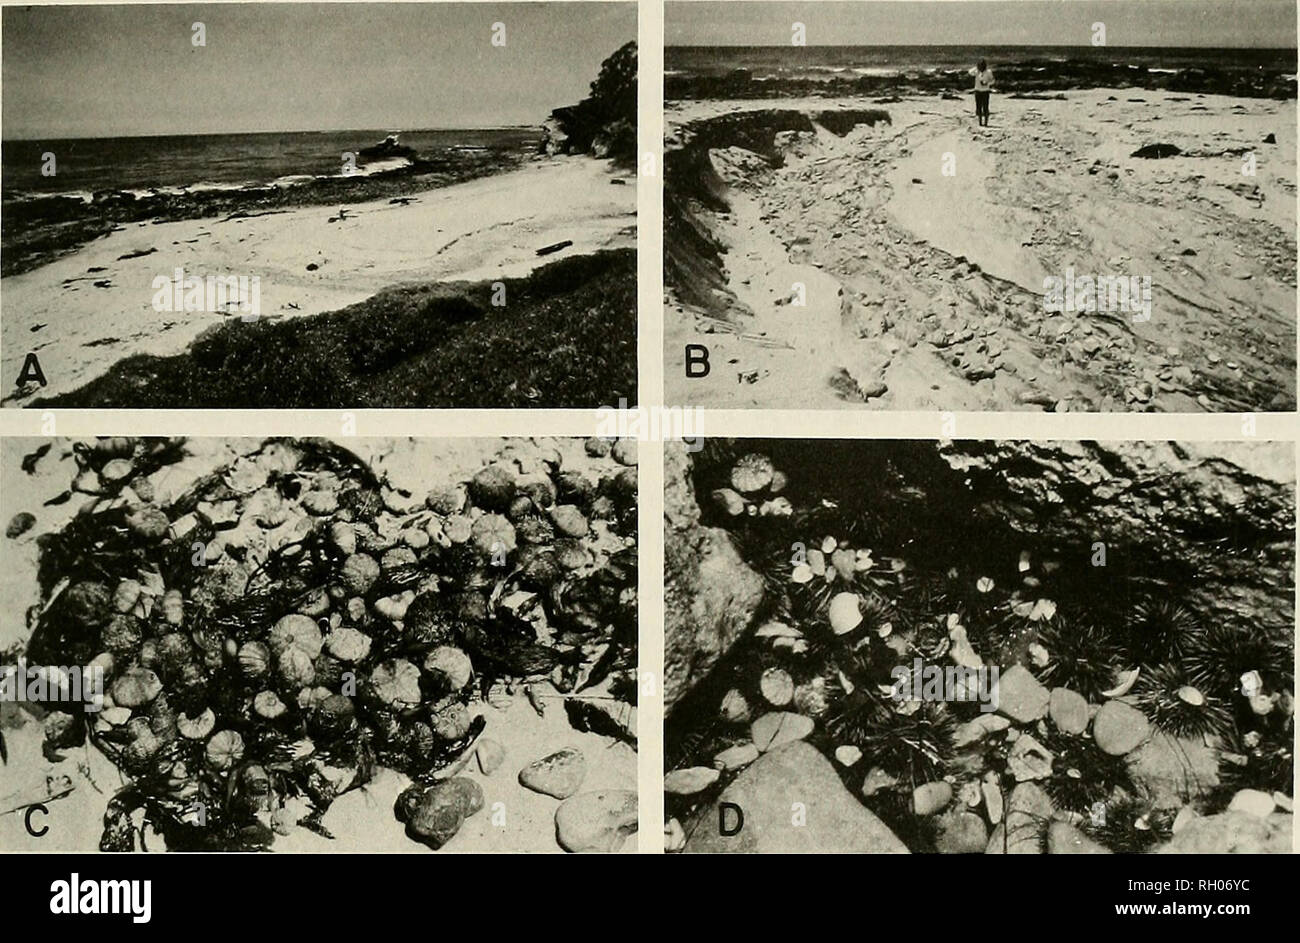 . Bulletin. Science; Natural history; Natural history. FLOOD EFFECTS ON INTERTIDAL BIOTAS 97. Fig. 2. (A) View of study site from Morning Canyon. (B) Beach above study site showing erosional path of the flash-flood. (C) Windrows of recently killed Strongylocentrotus purpuratus tests cast onto beach two days after the flood. (D) Population of healthy S. purpuratus in deep lower shore pool in the path of inundation. would kill the more stenohaline populations. Indeed, two days after the storm, windrows of recently killed sea urchins were cast up on the shore, but only above the study site near t Stock Photo